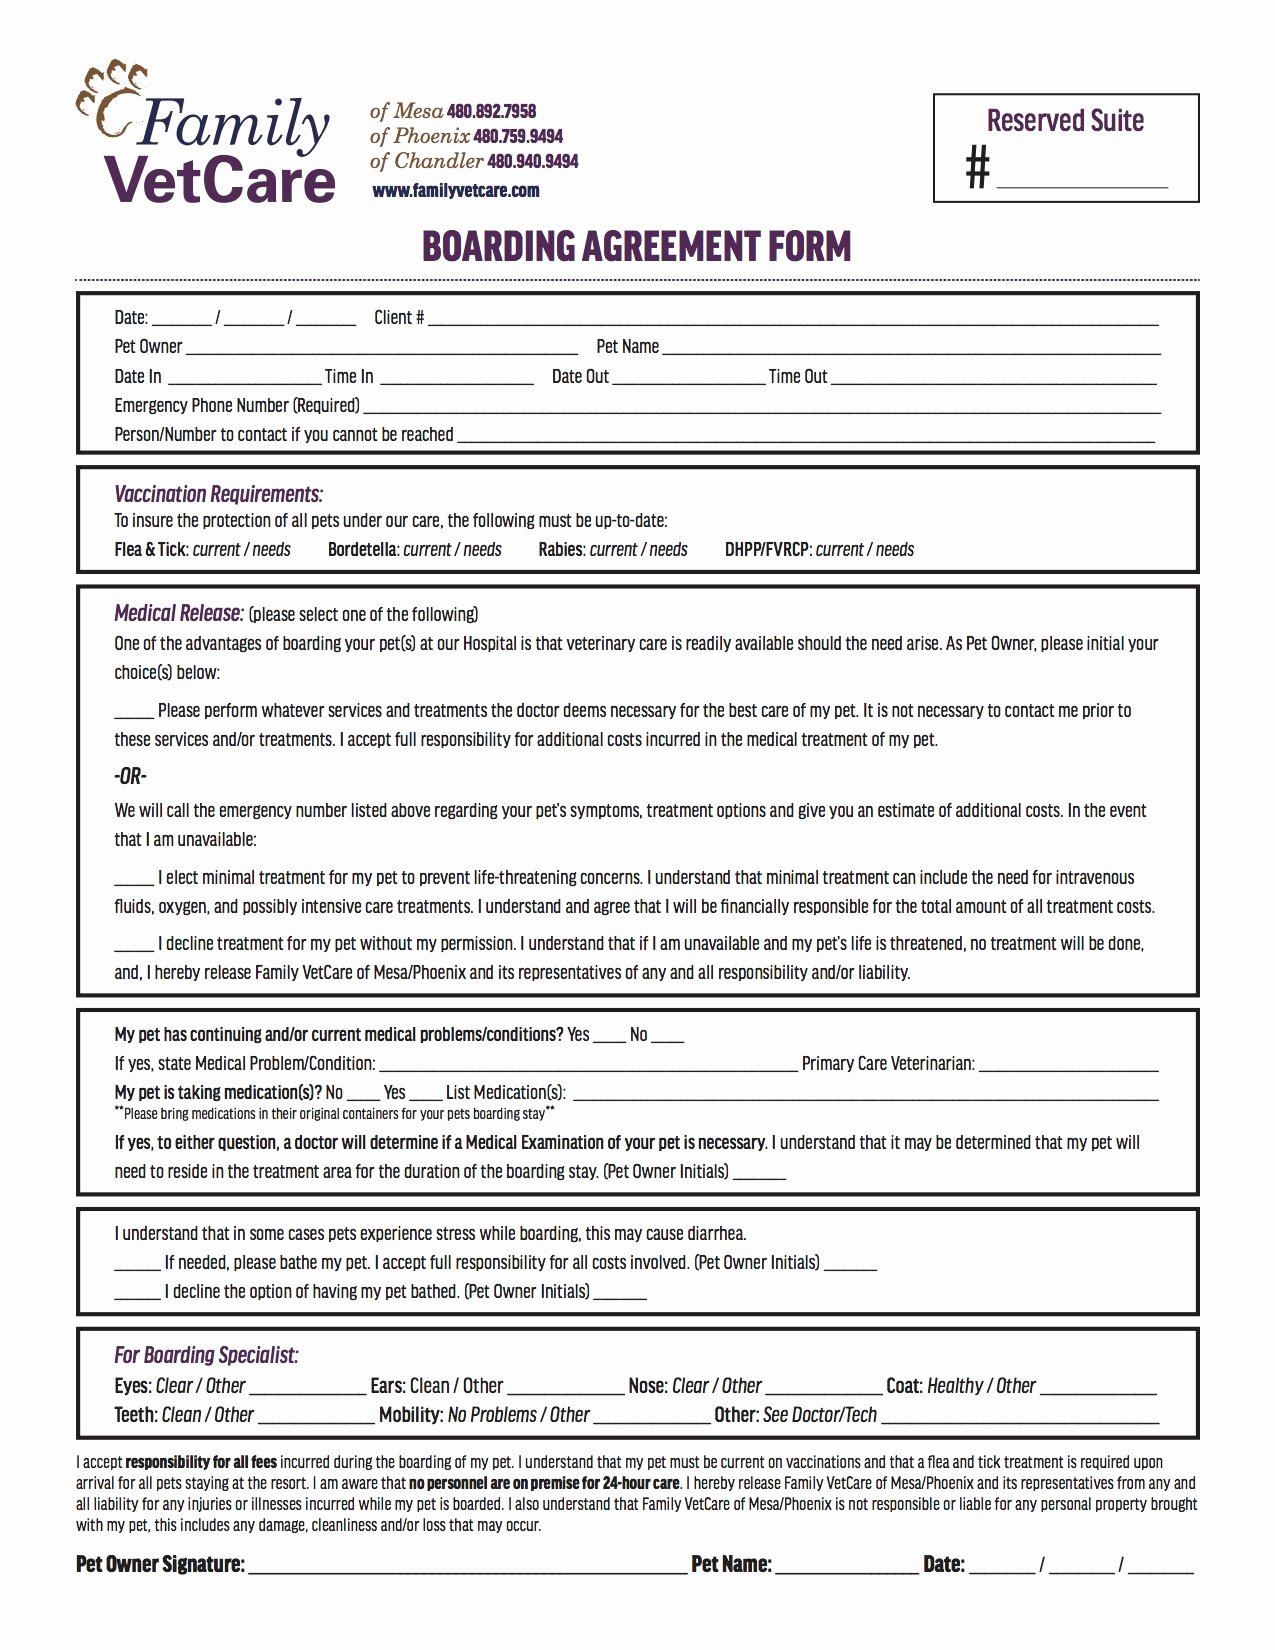 Dog Training Contract Template Elegant Veterinary Boarding forms to Pin On Pinterest